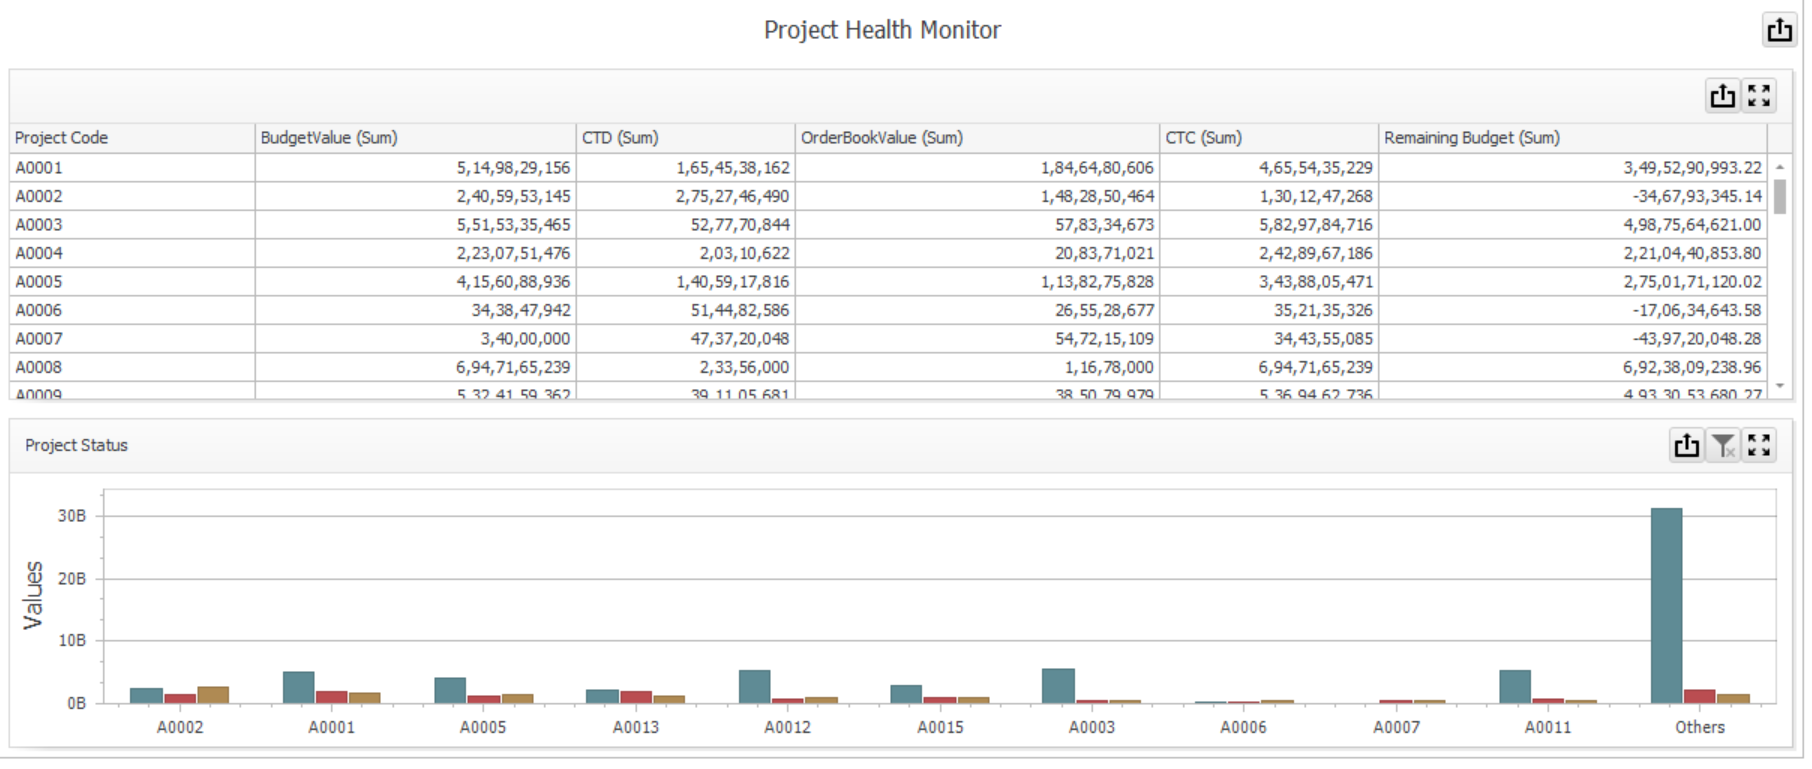 Project Health Monitor